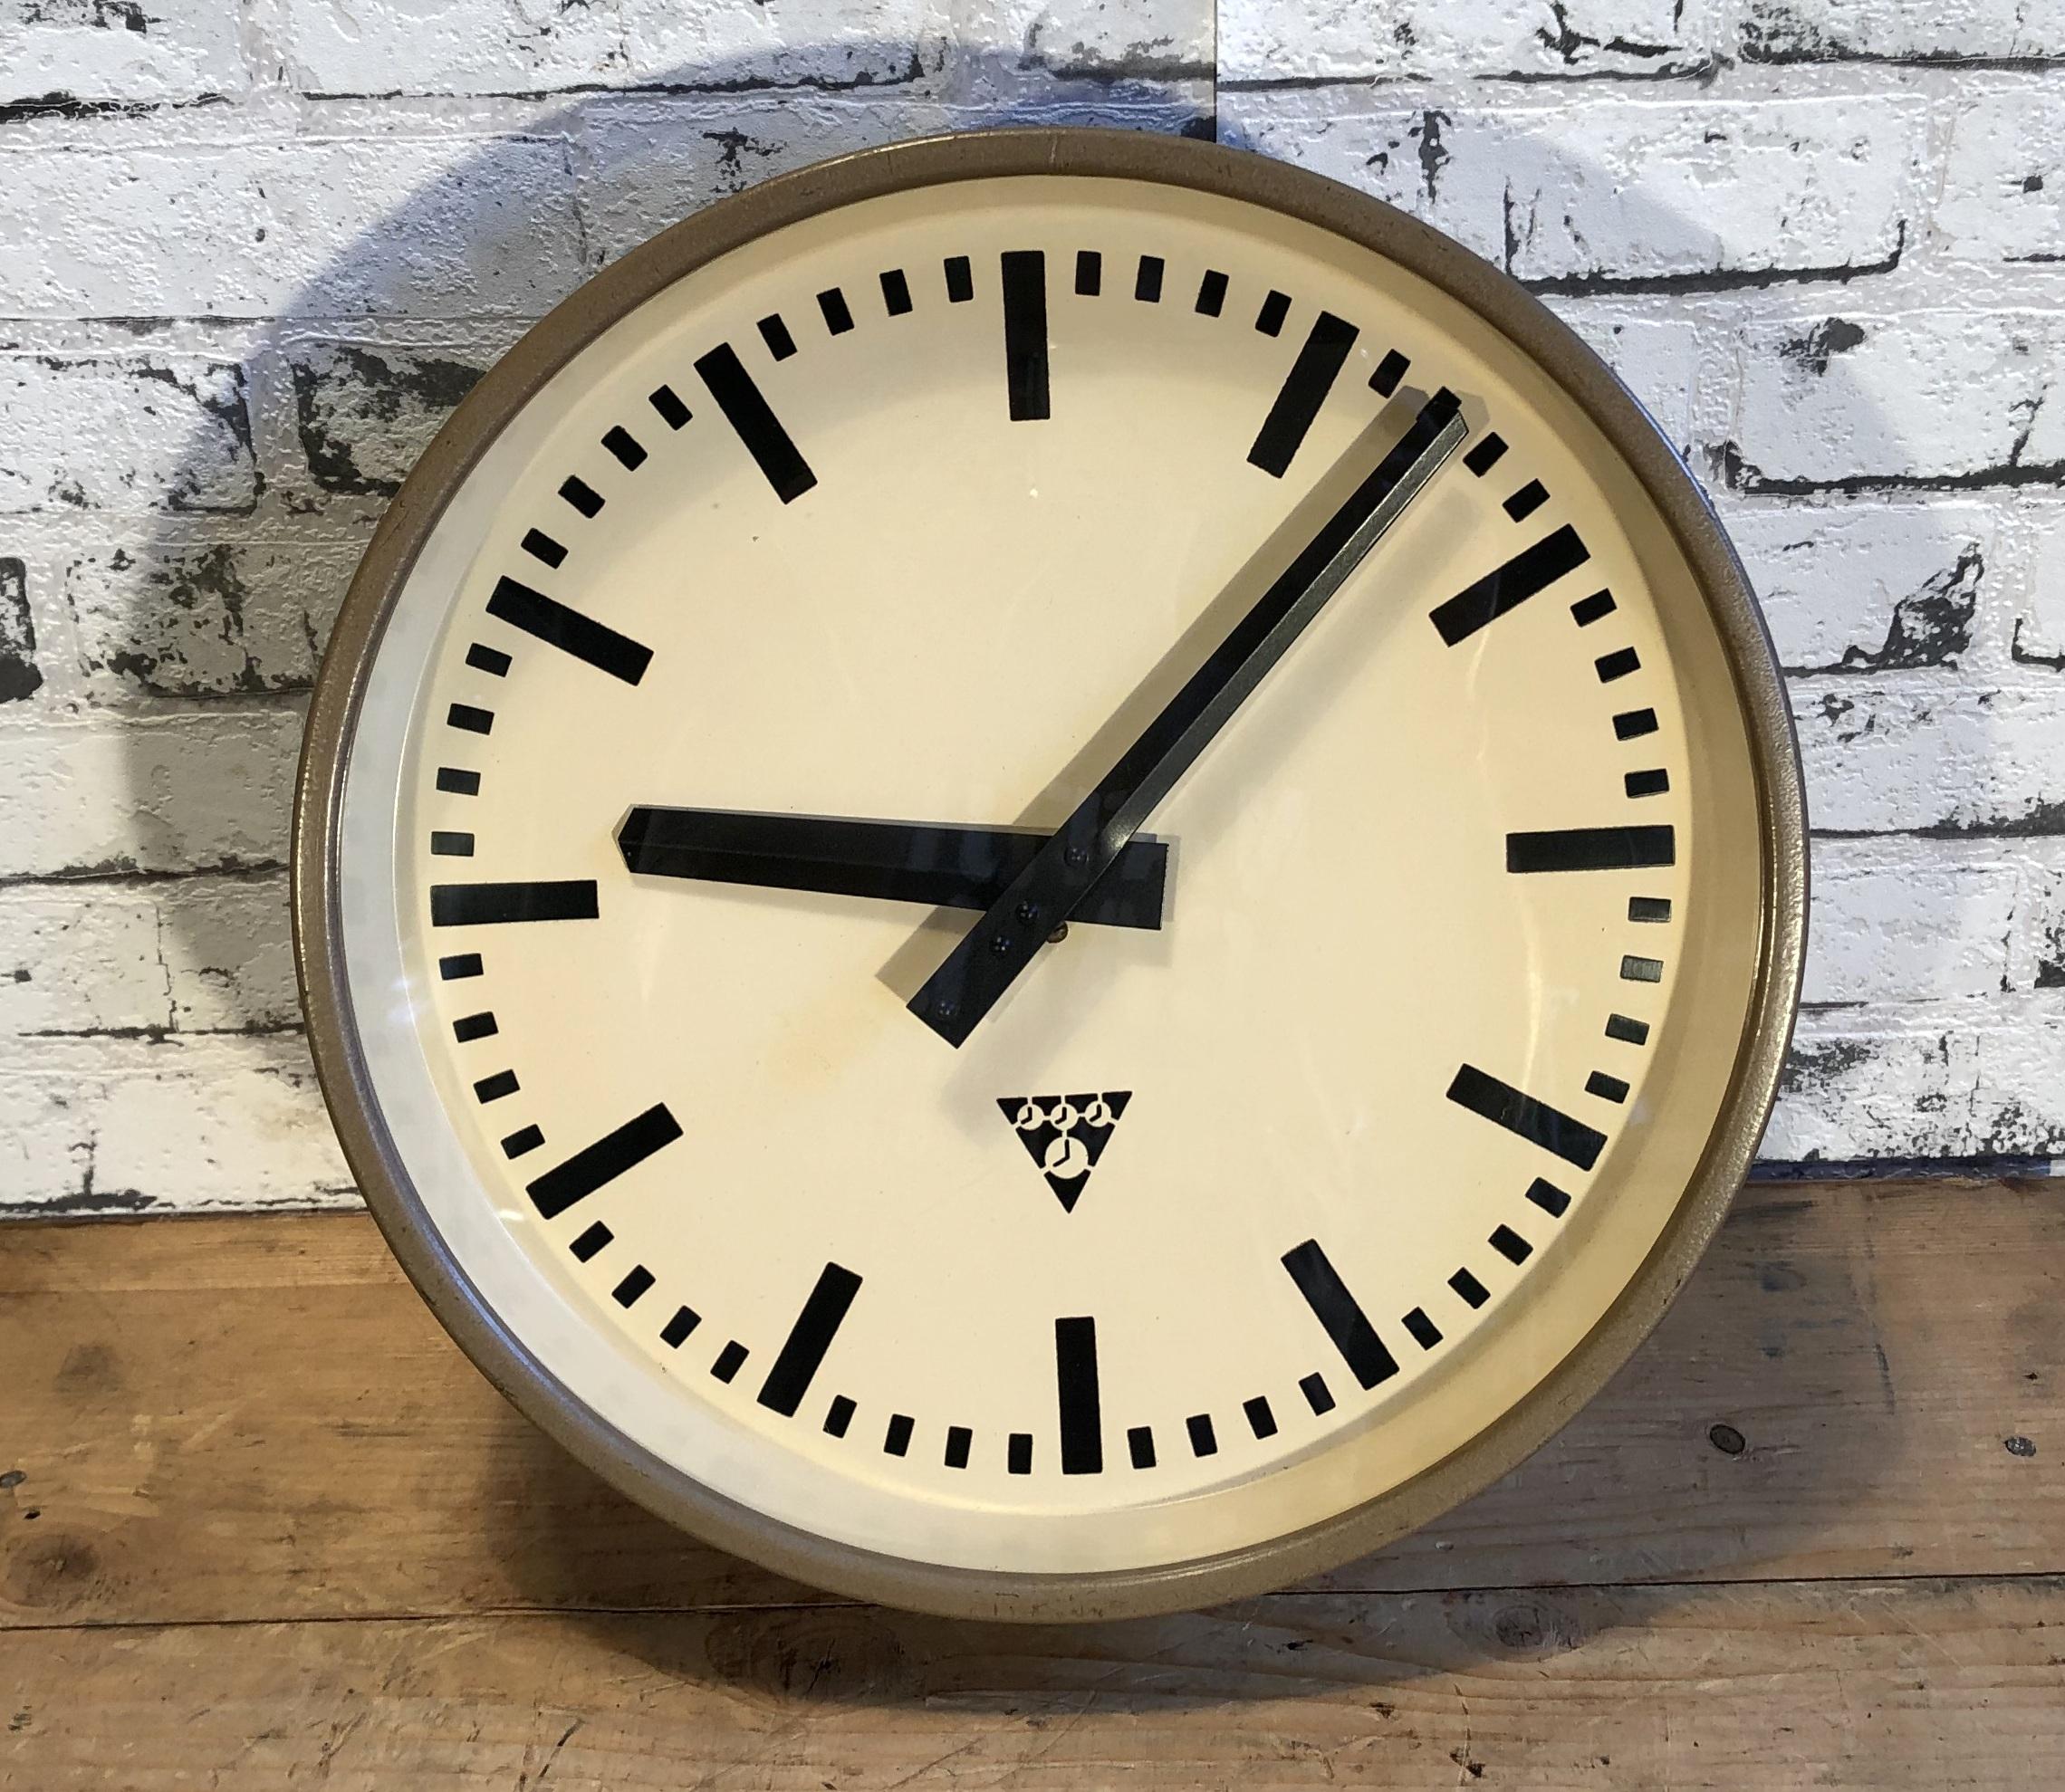 Pragotron wall clock made in former Czechoslovakia during the 1960s. It Features a brown hammer paint metal frame, iron dial and clear glass cover. The piece has been converted into a battery-powered clockwork and requires only one